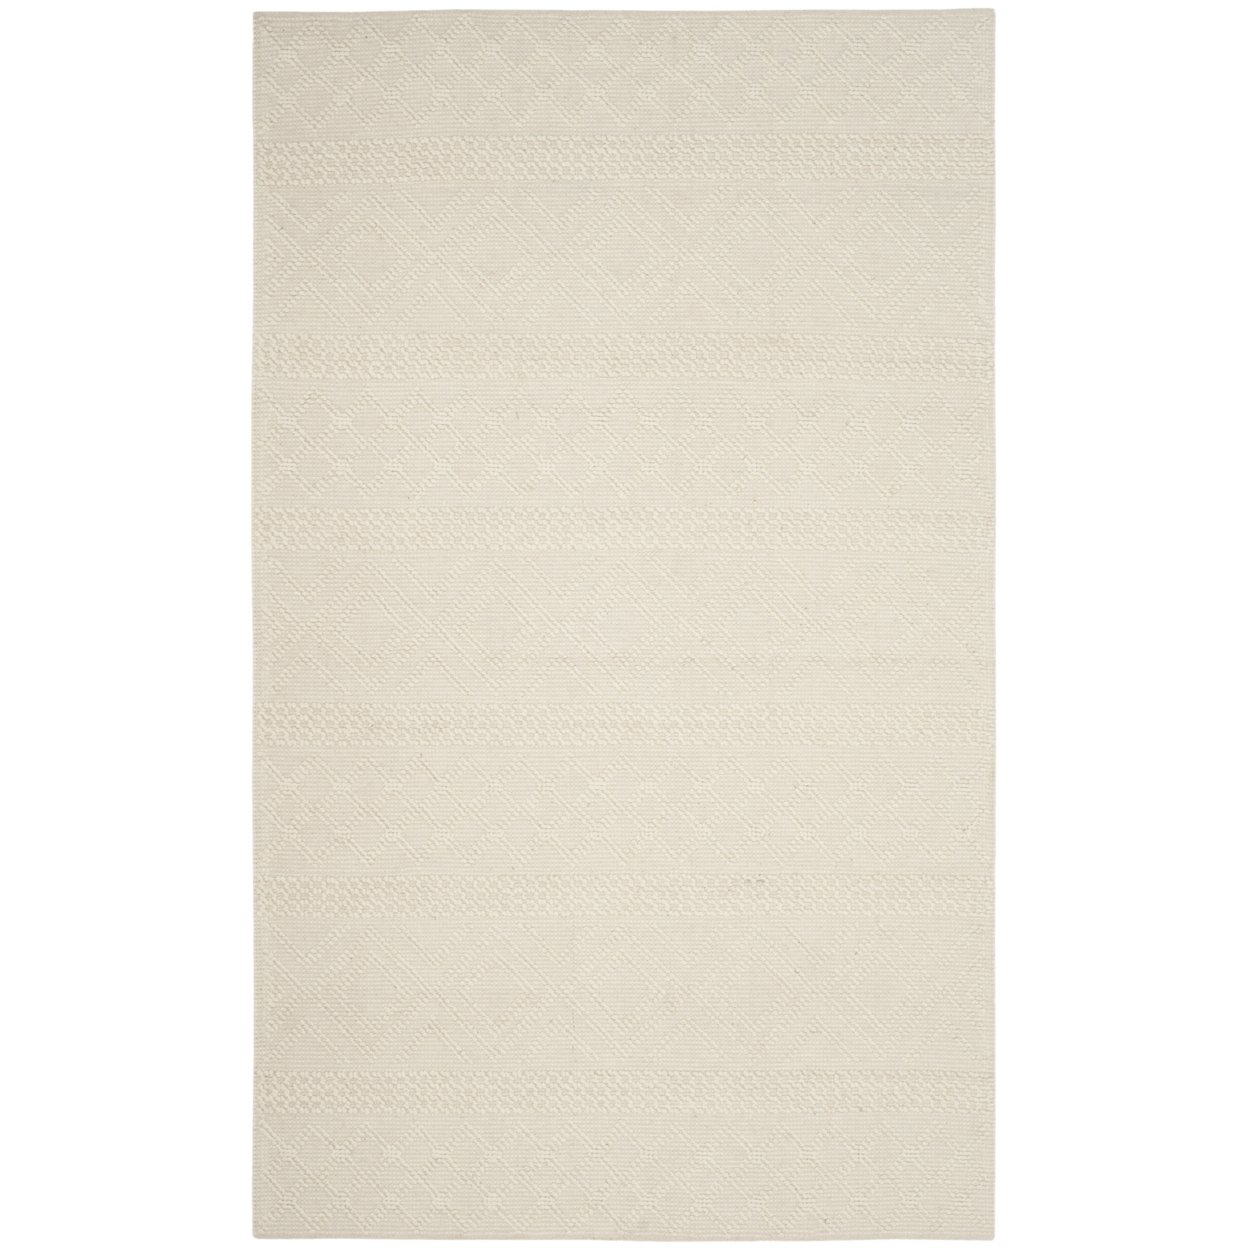 SAFAVIEH Vermont Collection VRM211A Handwoven Ivory Rug - 12' Square